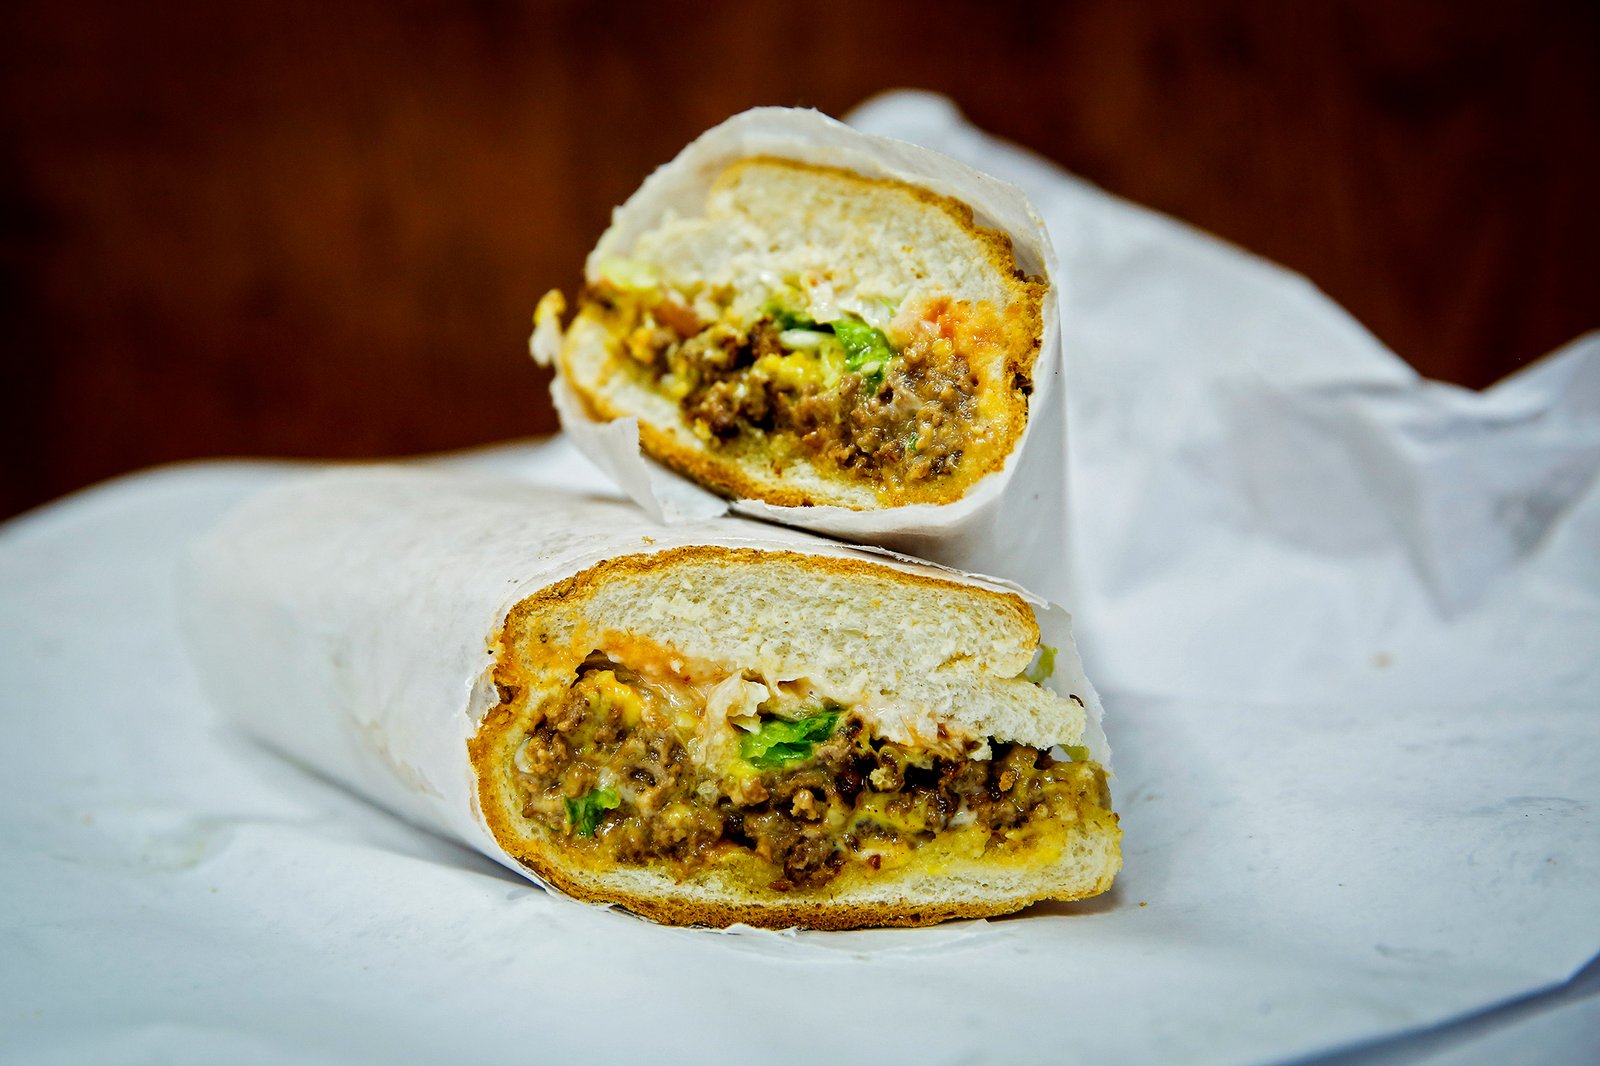 A new burger restaurant brings chopped cheese to Berkeley